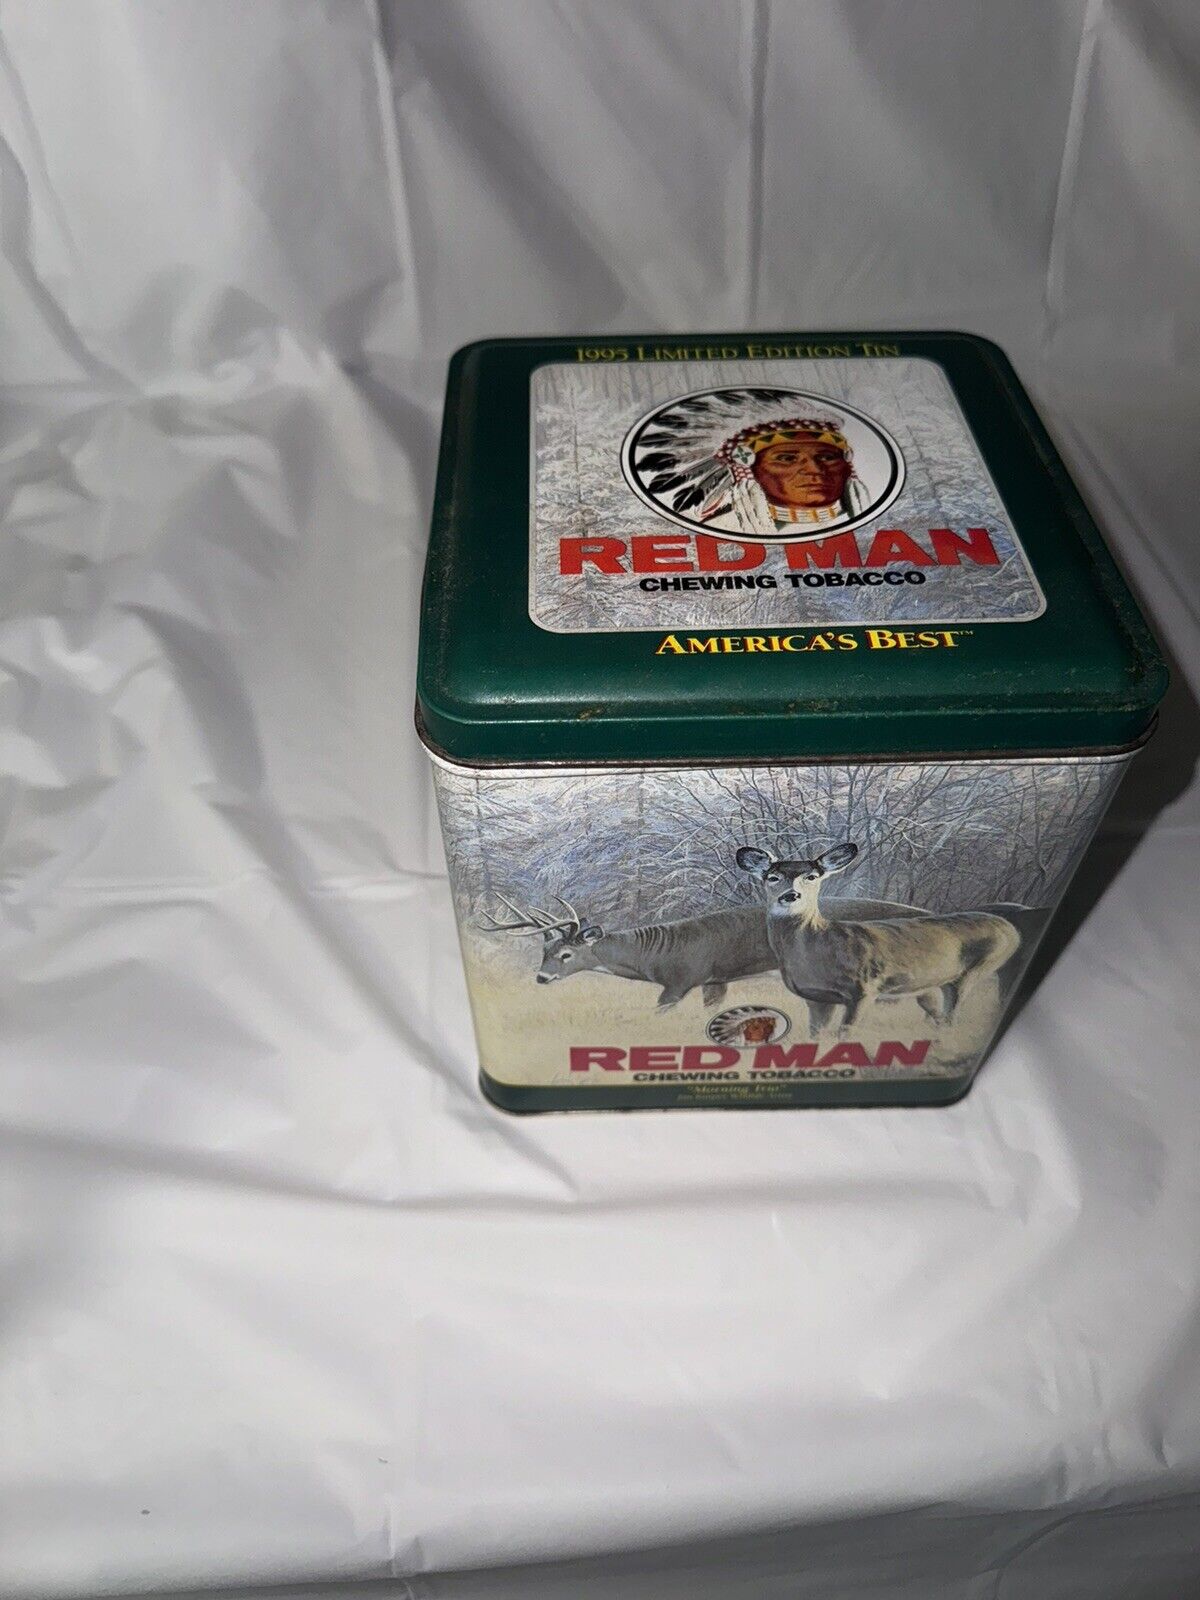 Morning Trio 1955 Special Edition Red Man Chewing Tobacco Tin.